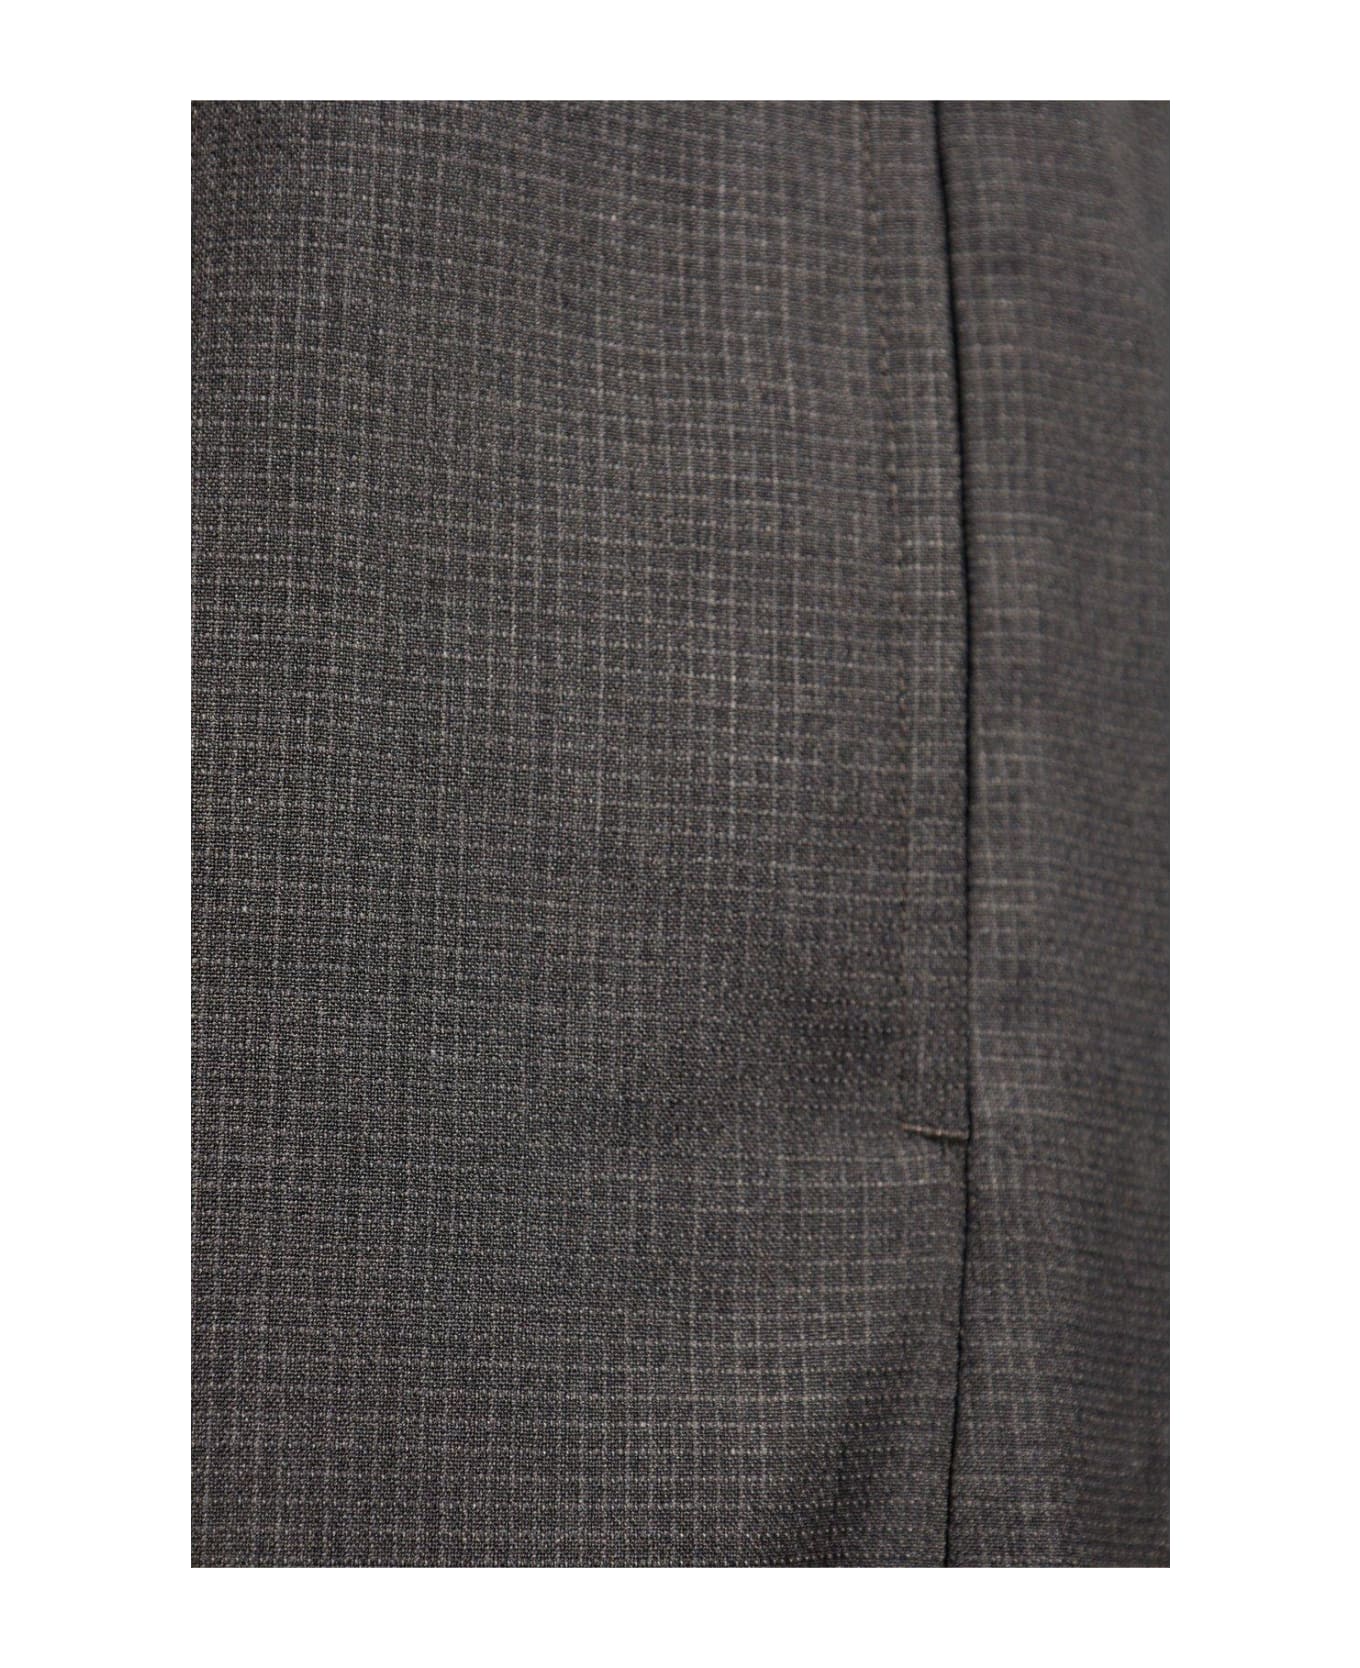 Givenchy Embroidered Straight-leg Trousers - Grey ボトムス